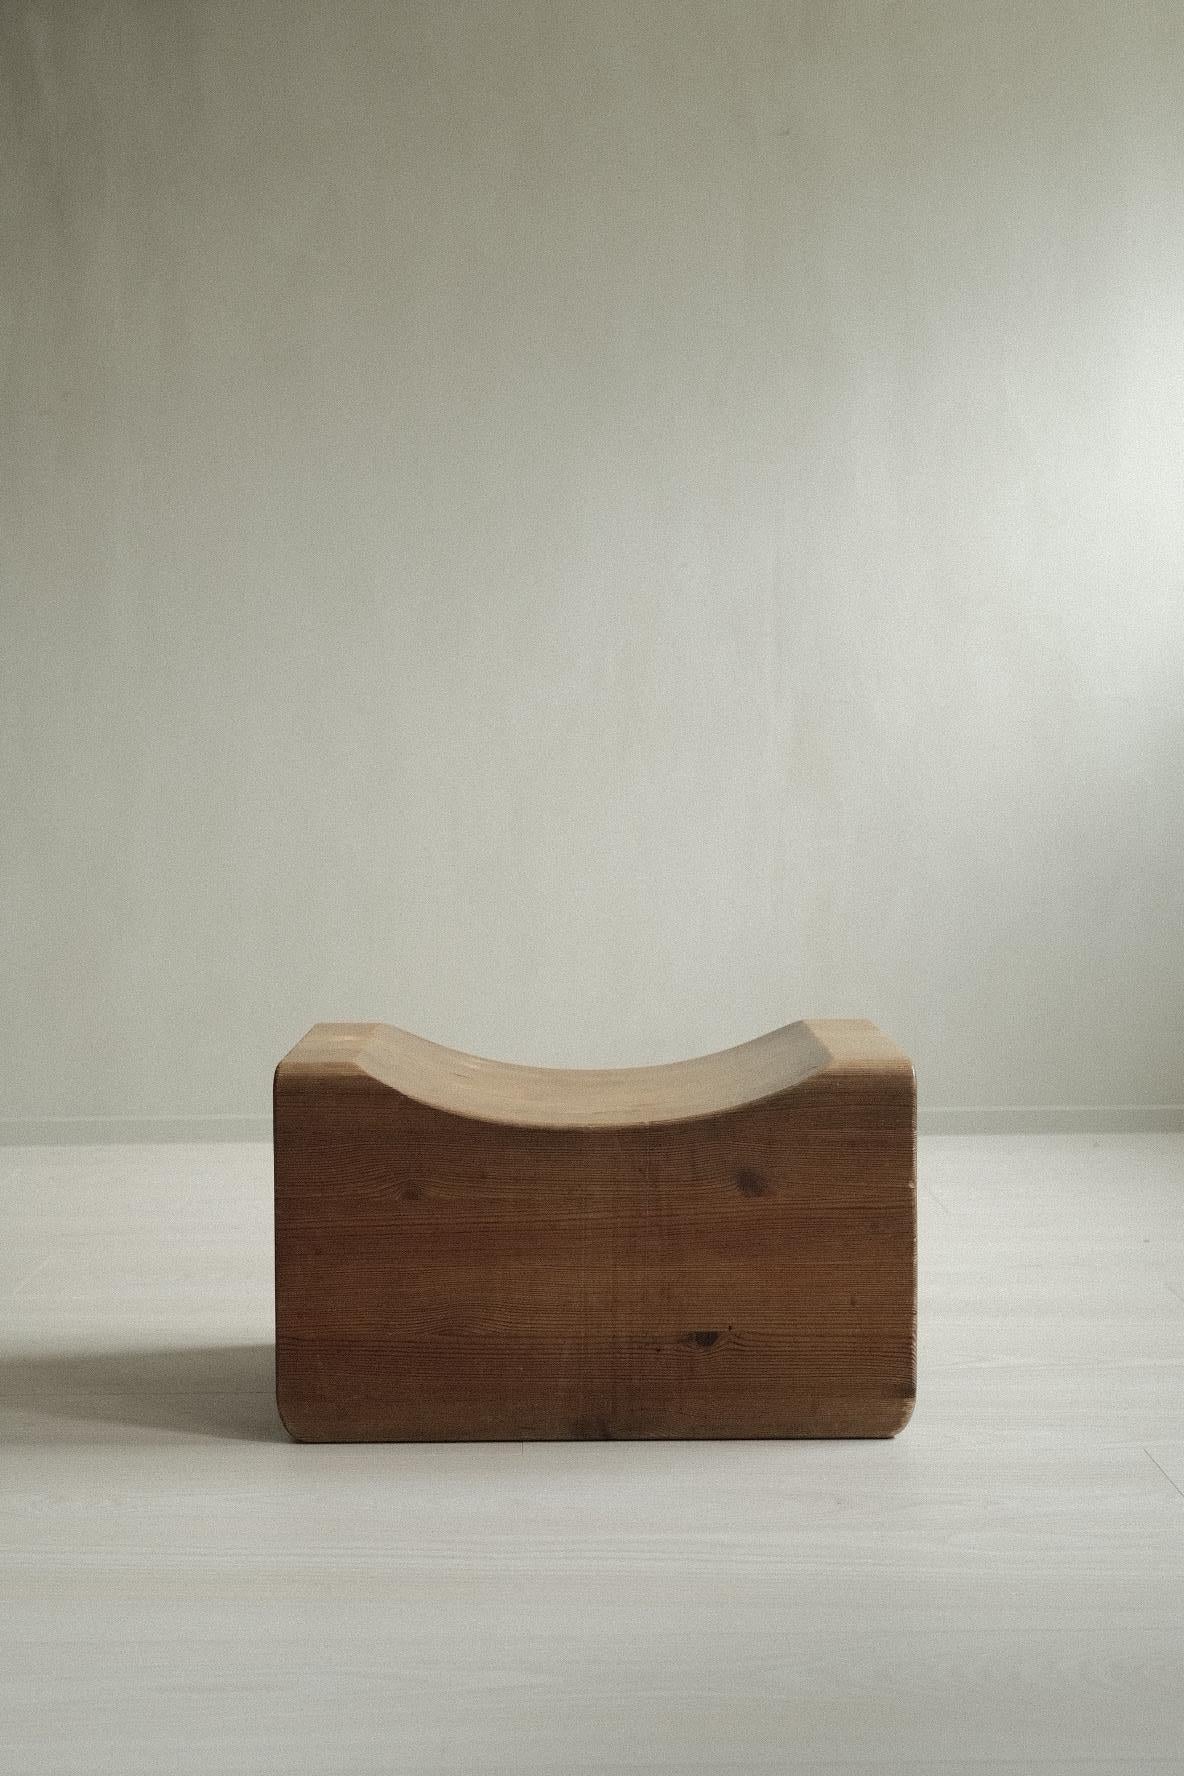 Pine Stool by K.J. Pettersson & Söner, Formerly Attributed to Axel Einar Hjorth 2